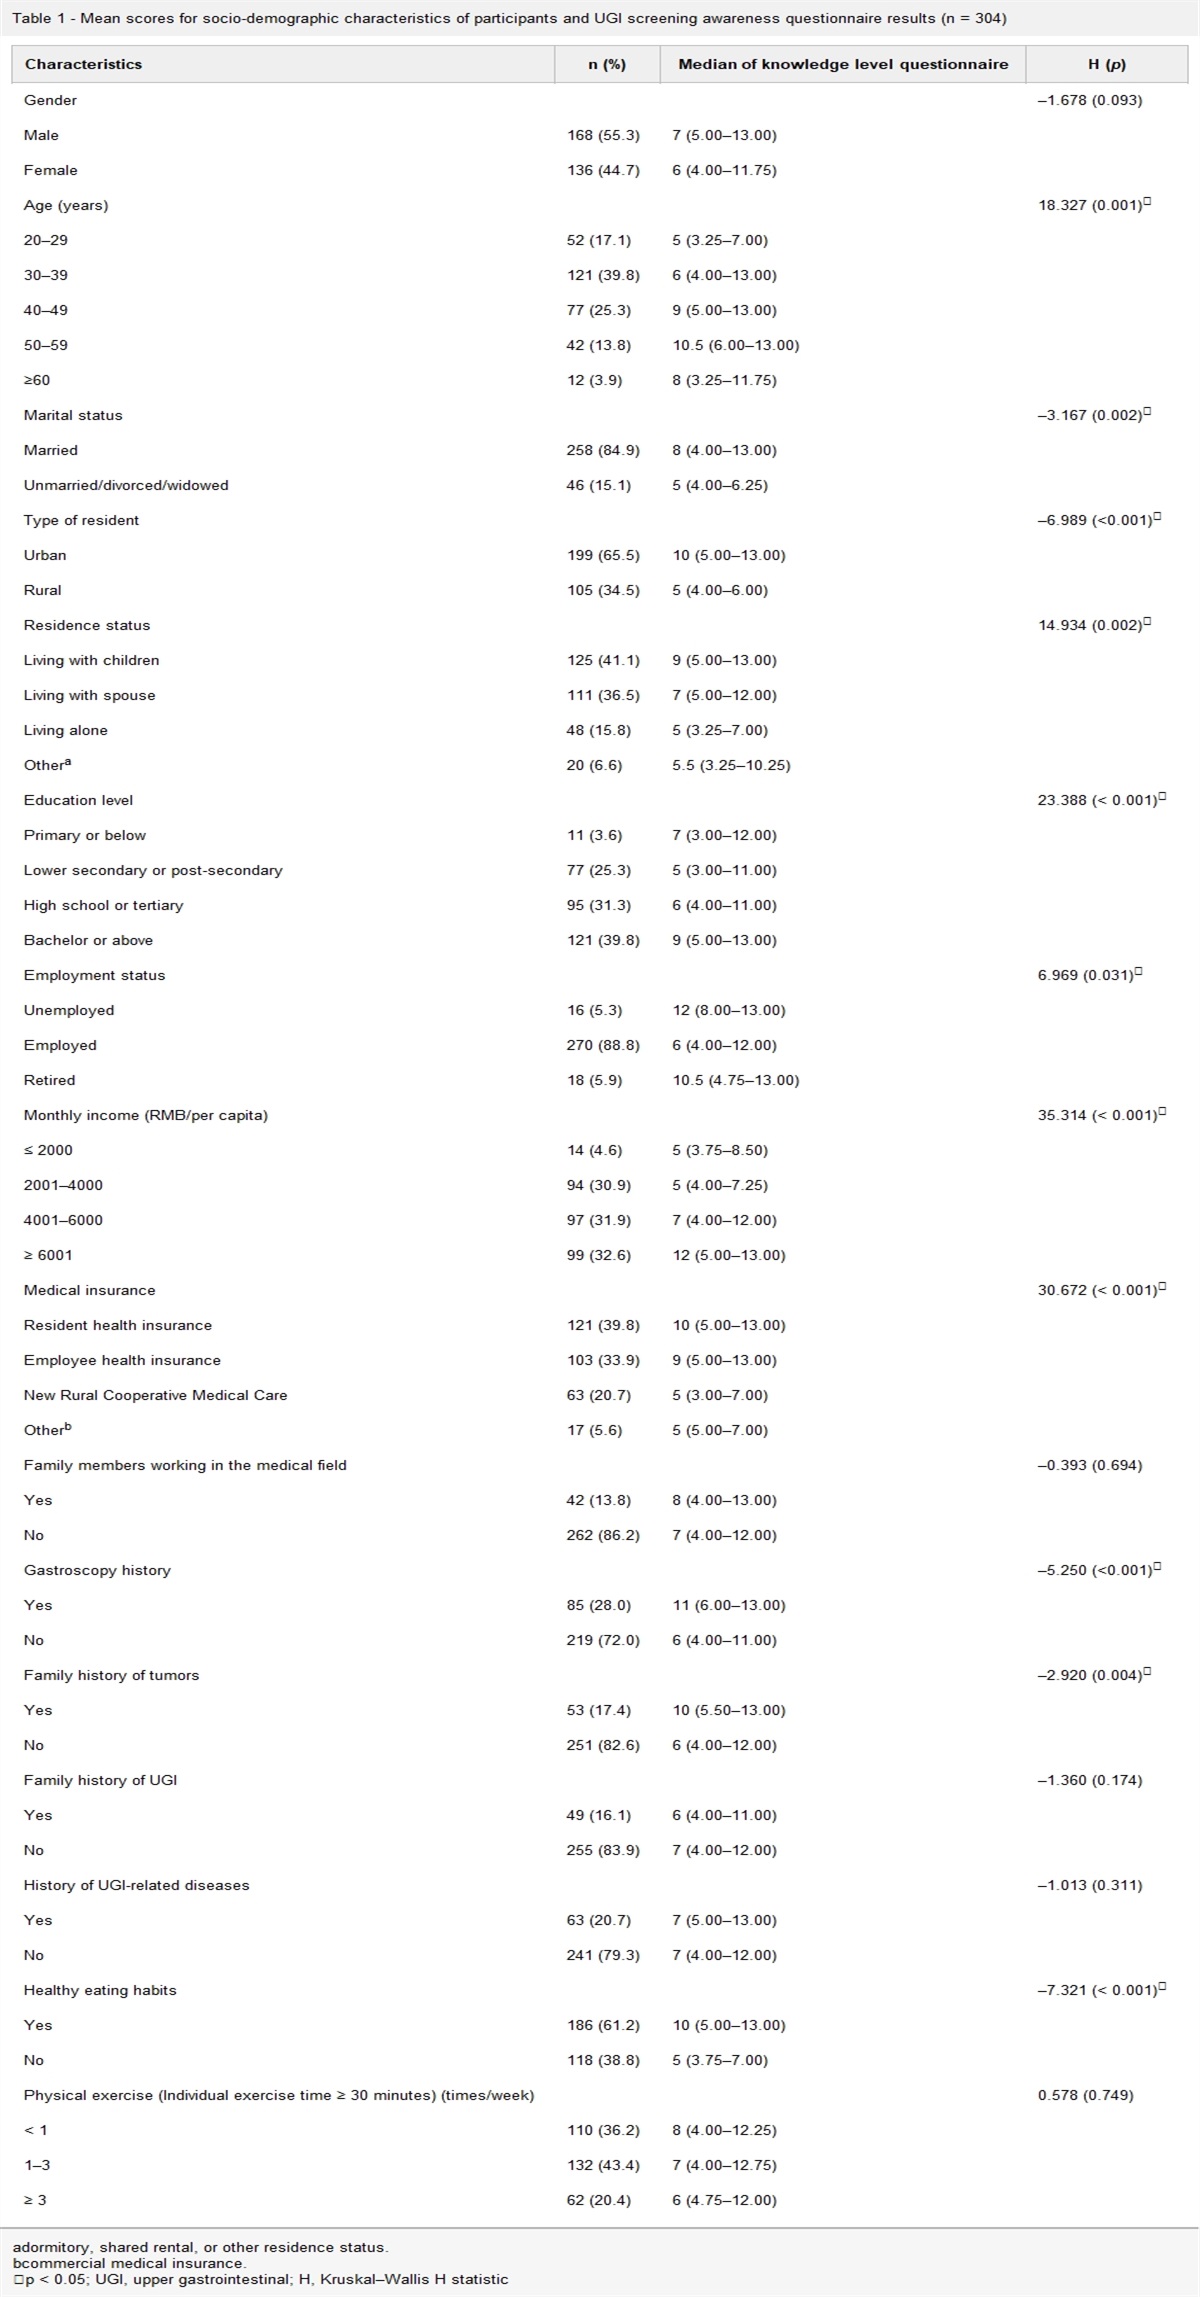 Barriers to upper gastrointestinal screening among the general population in high-prevalence areas: a cross-sectional study